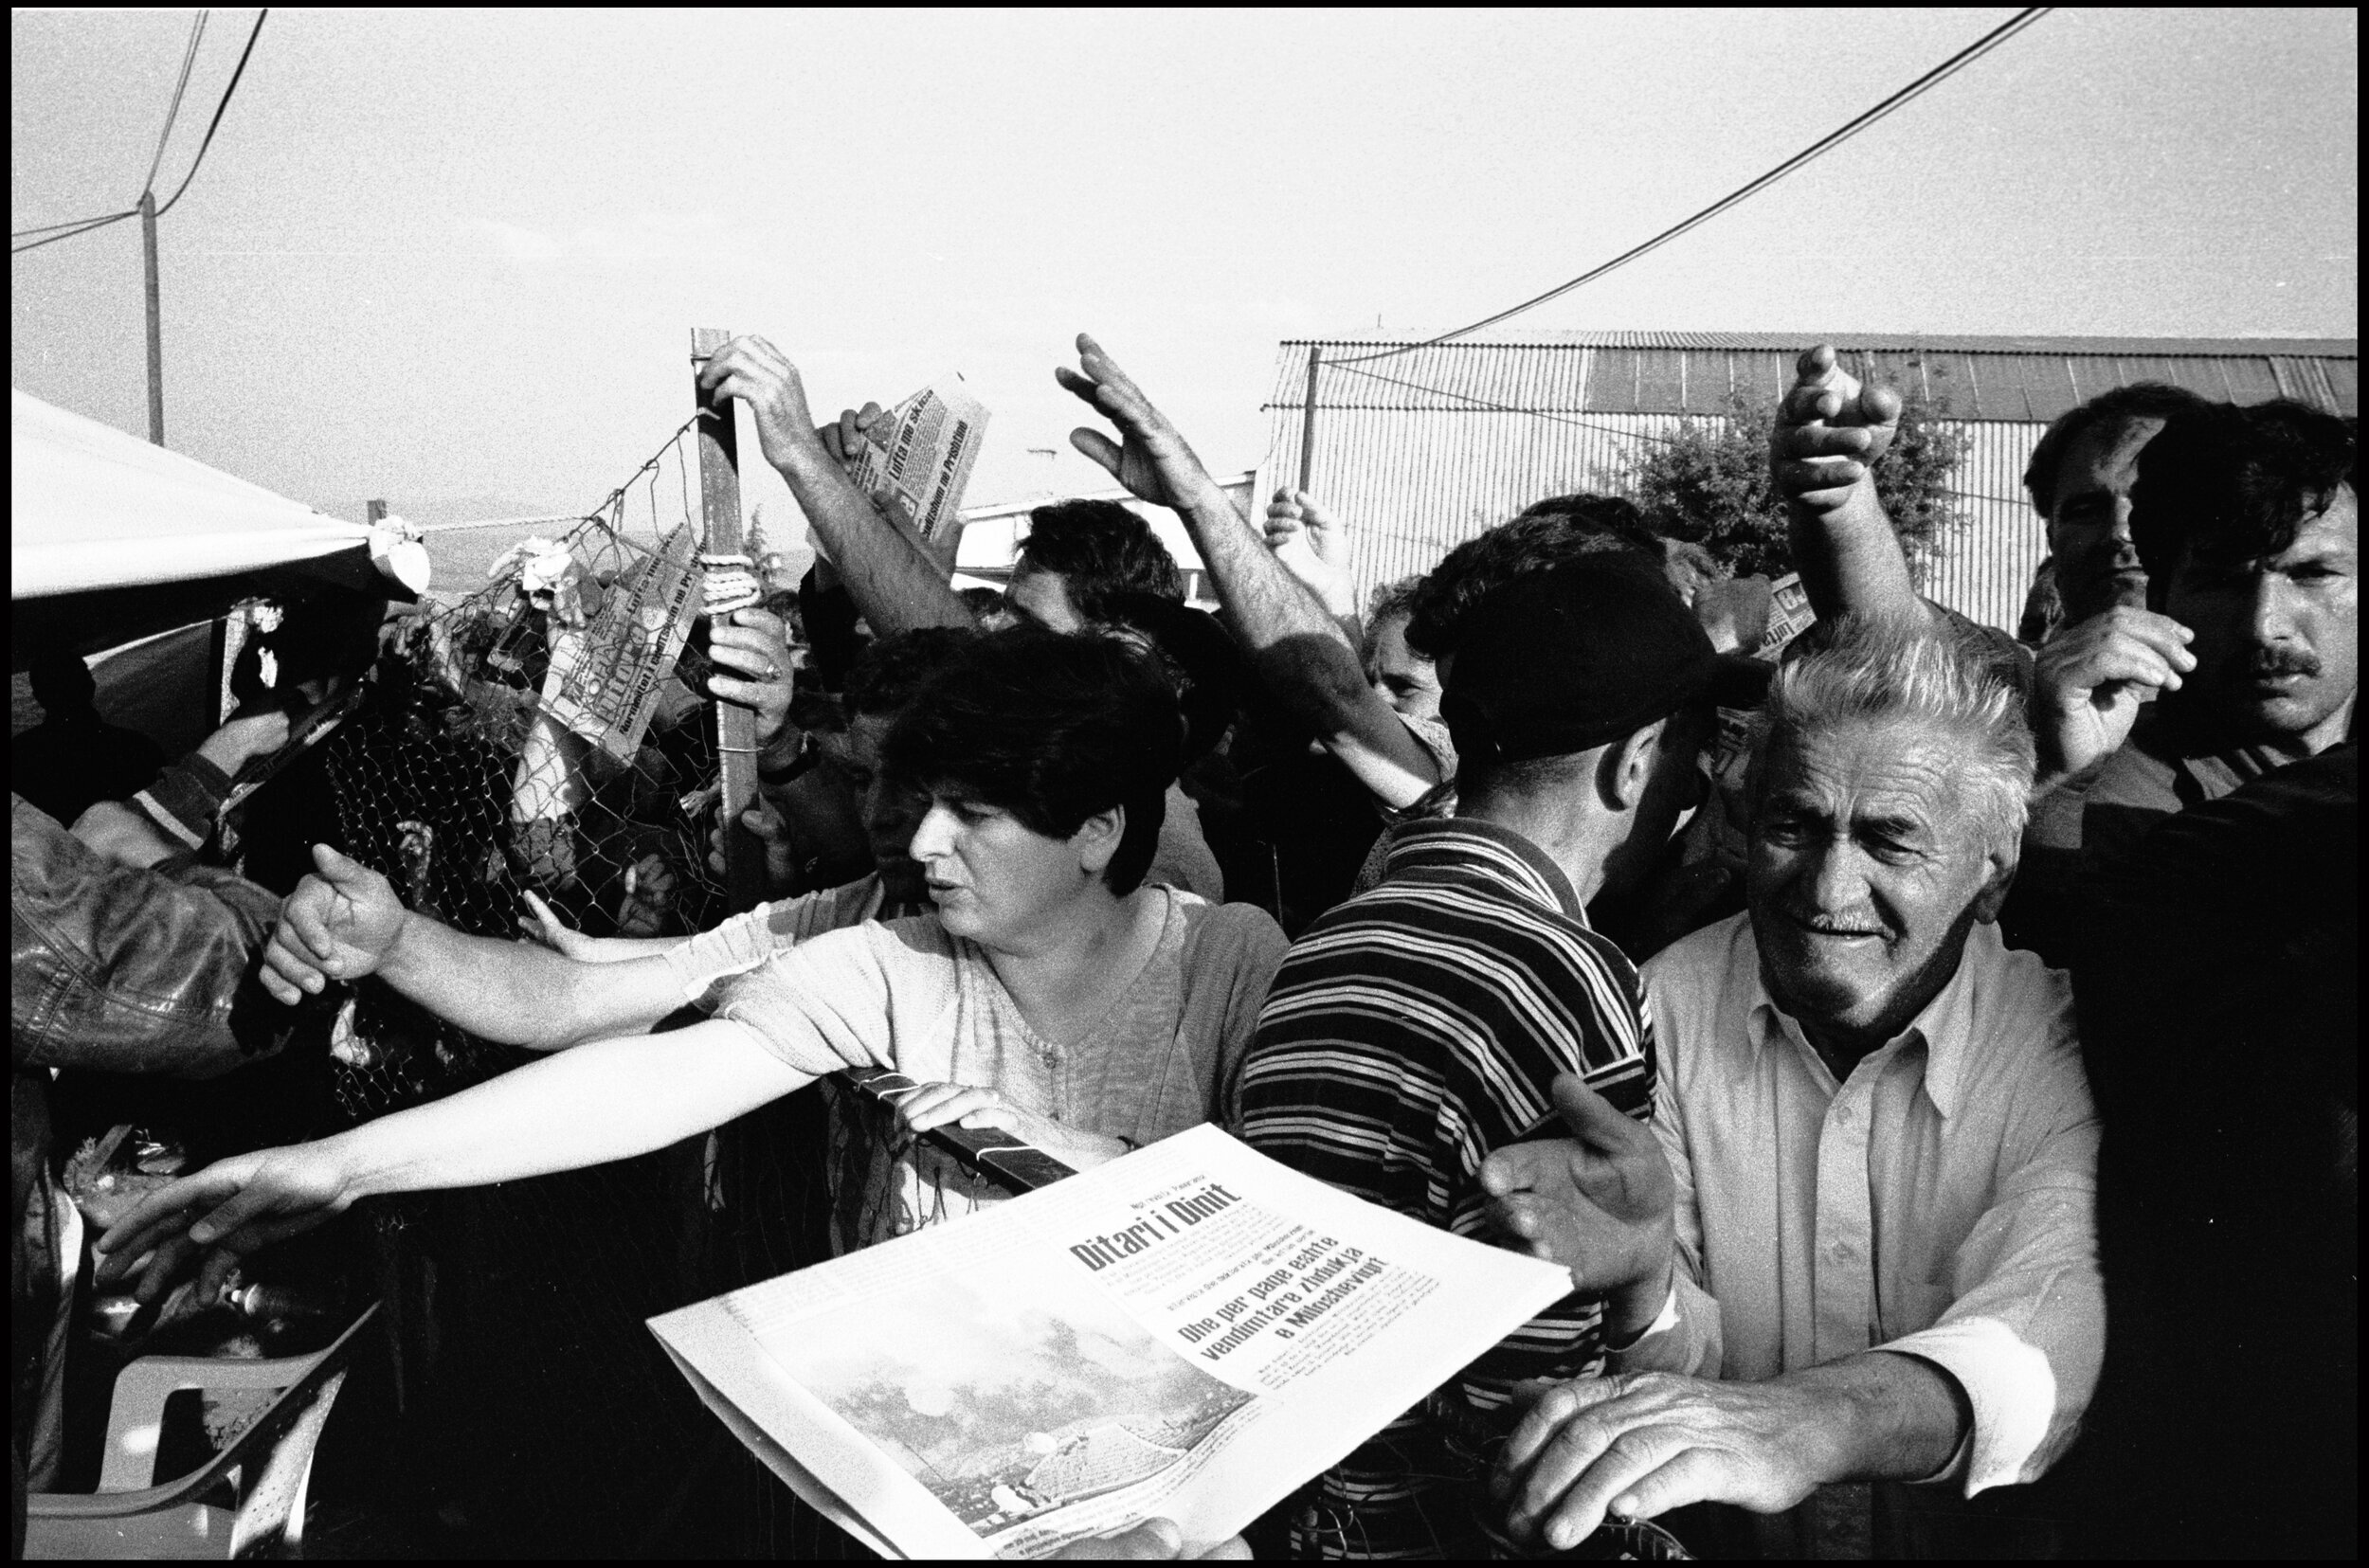  Refugees clamour for the morning edition of the Kosovar newspaper  Koha Dittore  which was printed in exile in Stankovic refugee camp, Macedonia. 